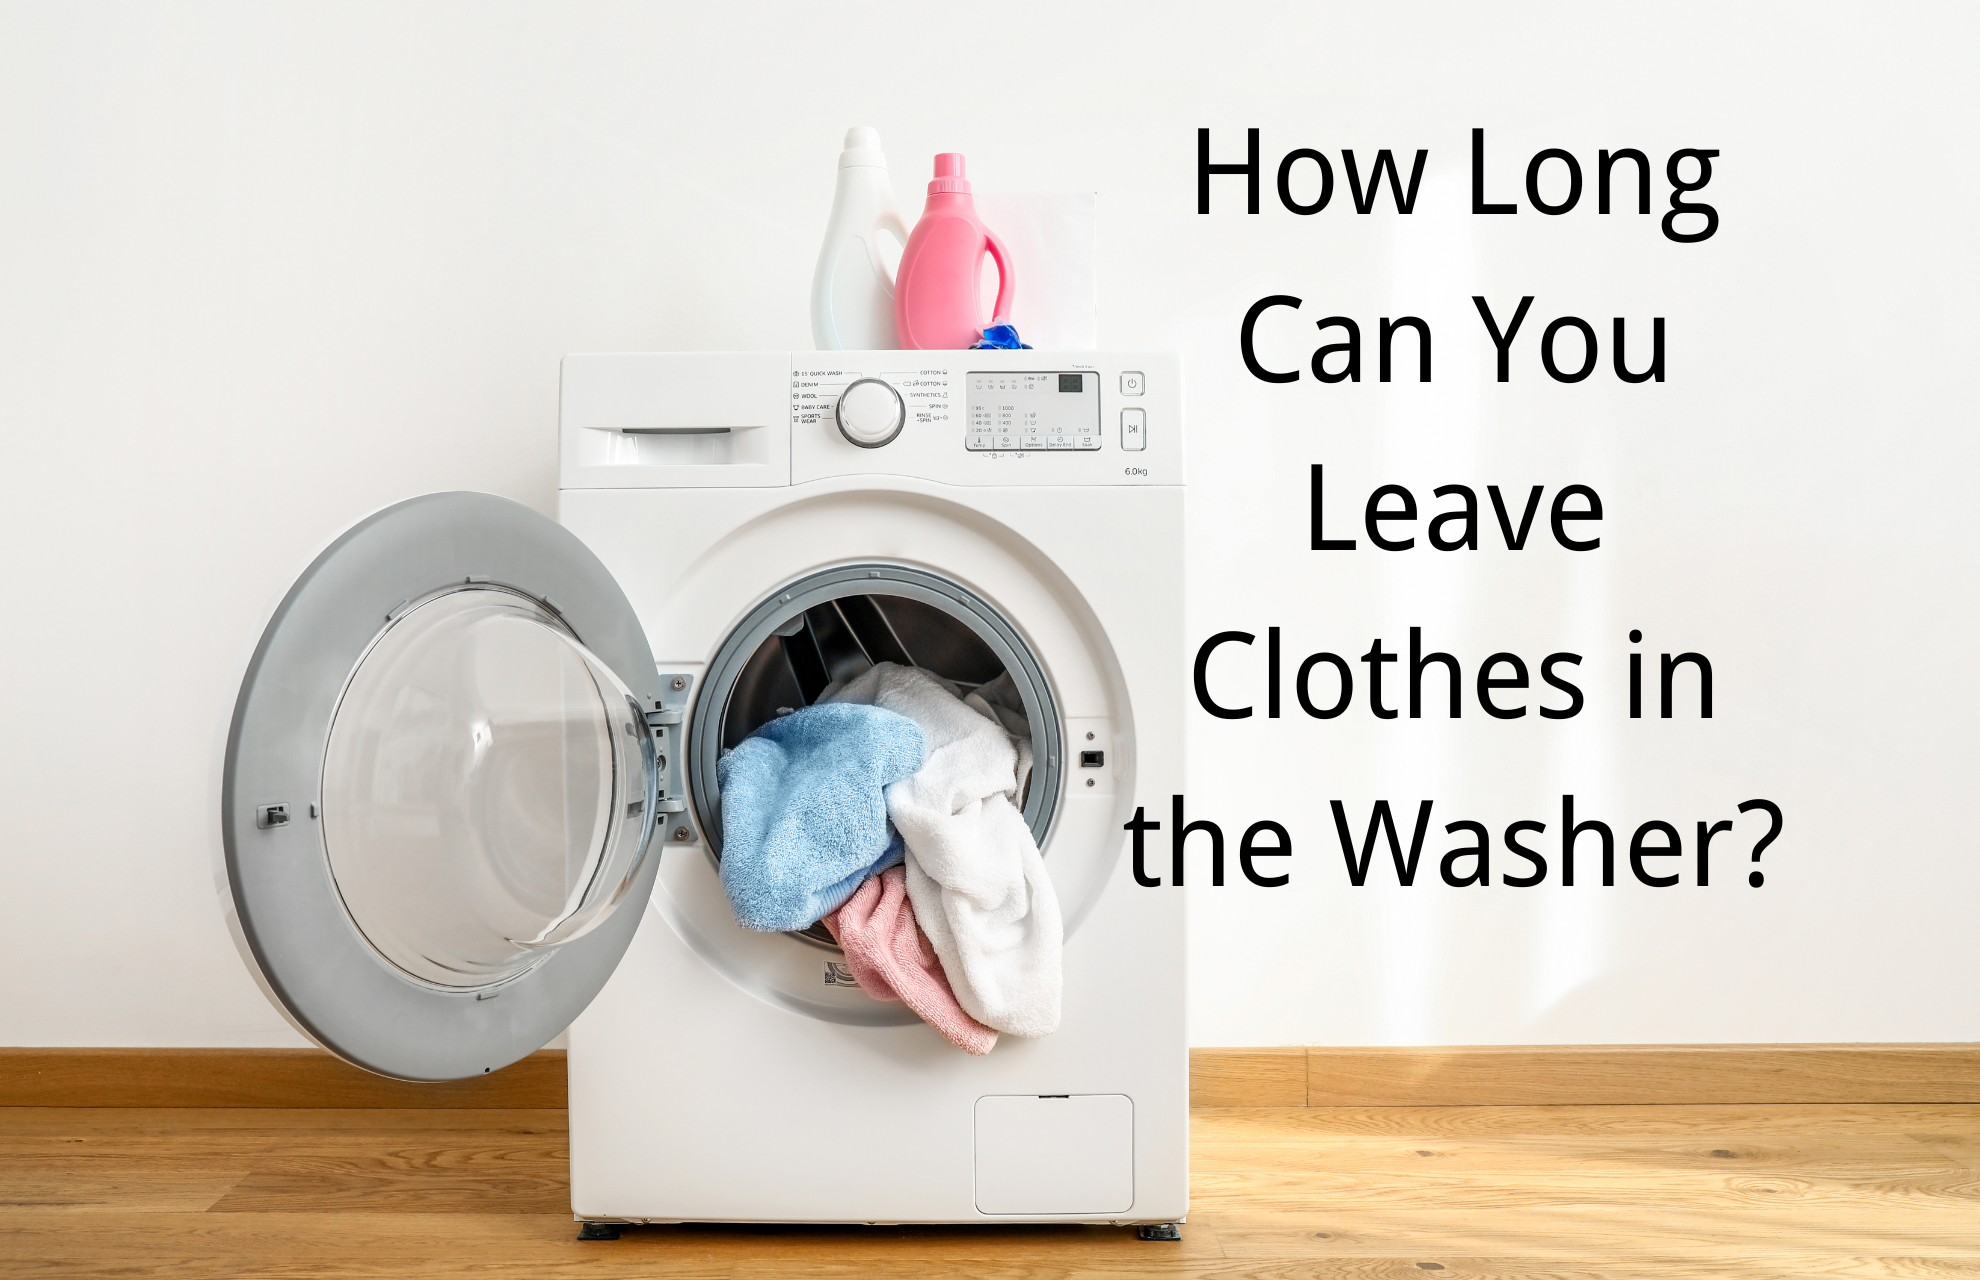 How Long Can You Leave Clothes in the Washer?